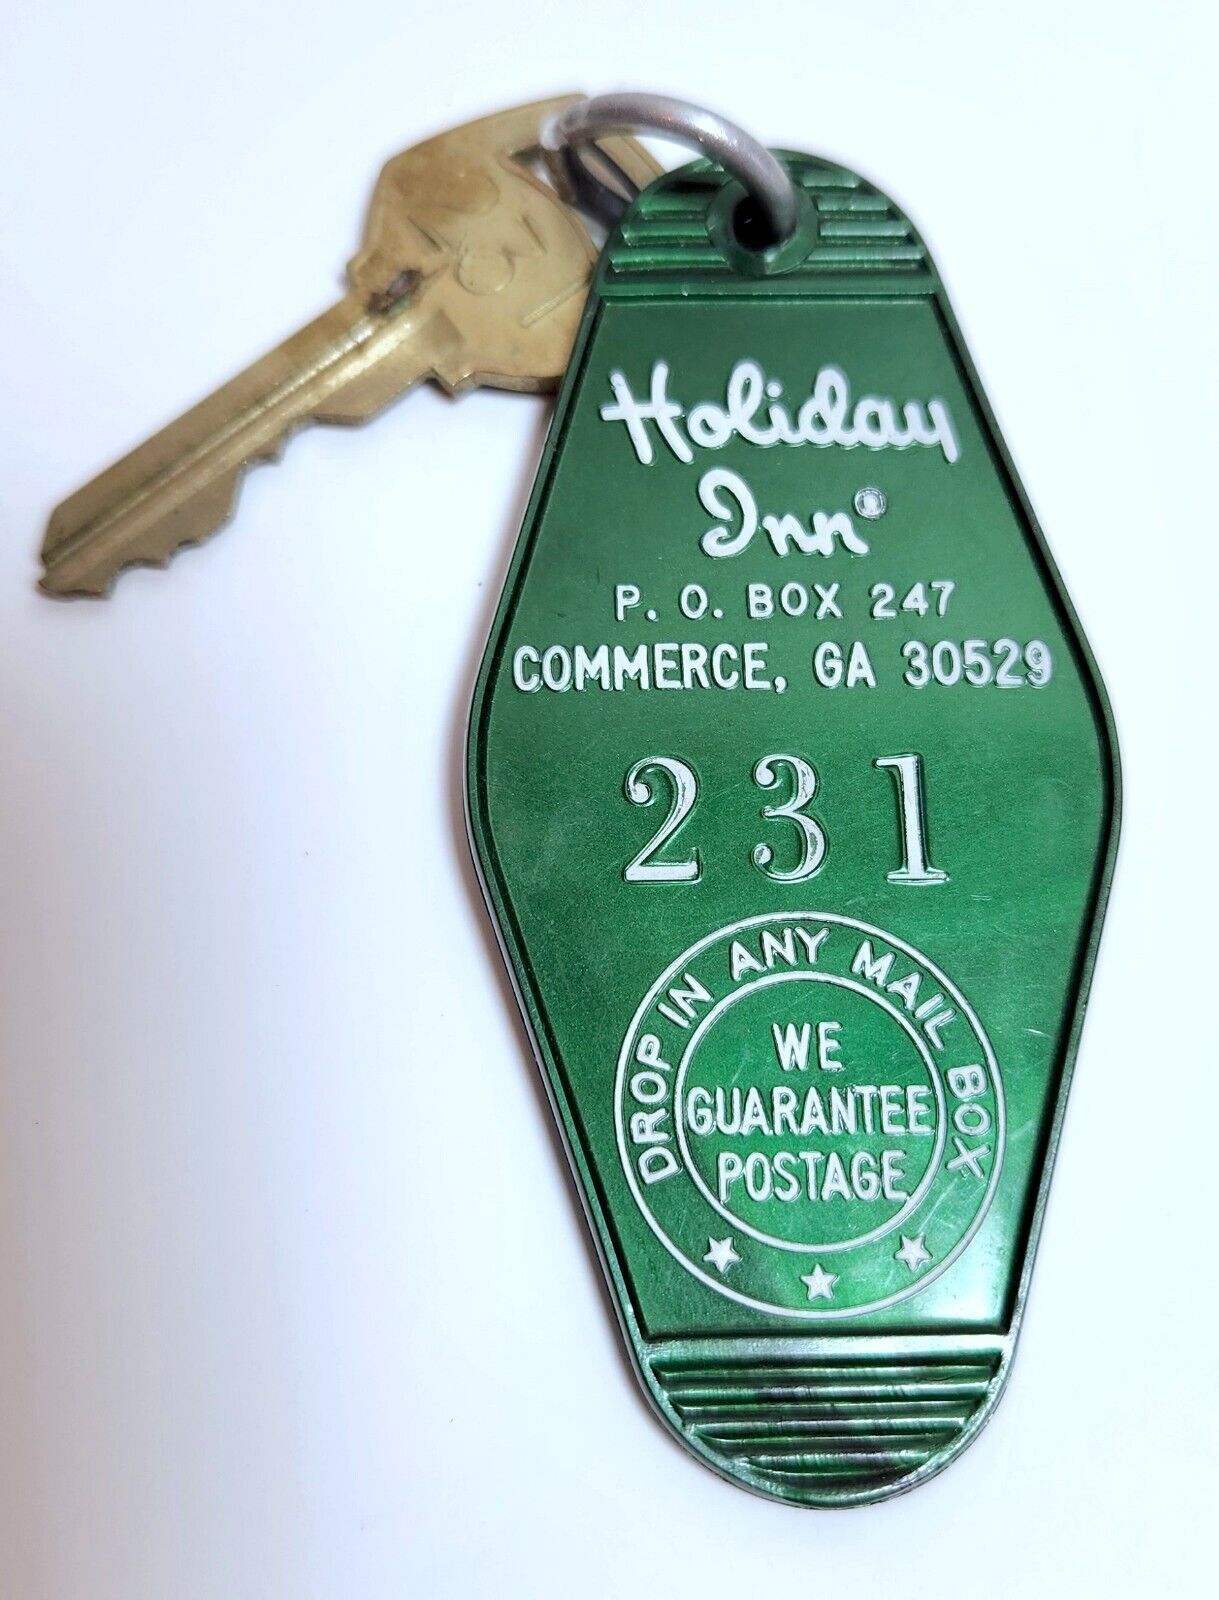 Commerce, Georgia; Holiday Inn Motel; old hotel room key and fob #231